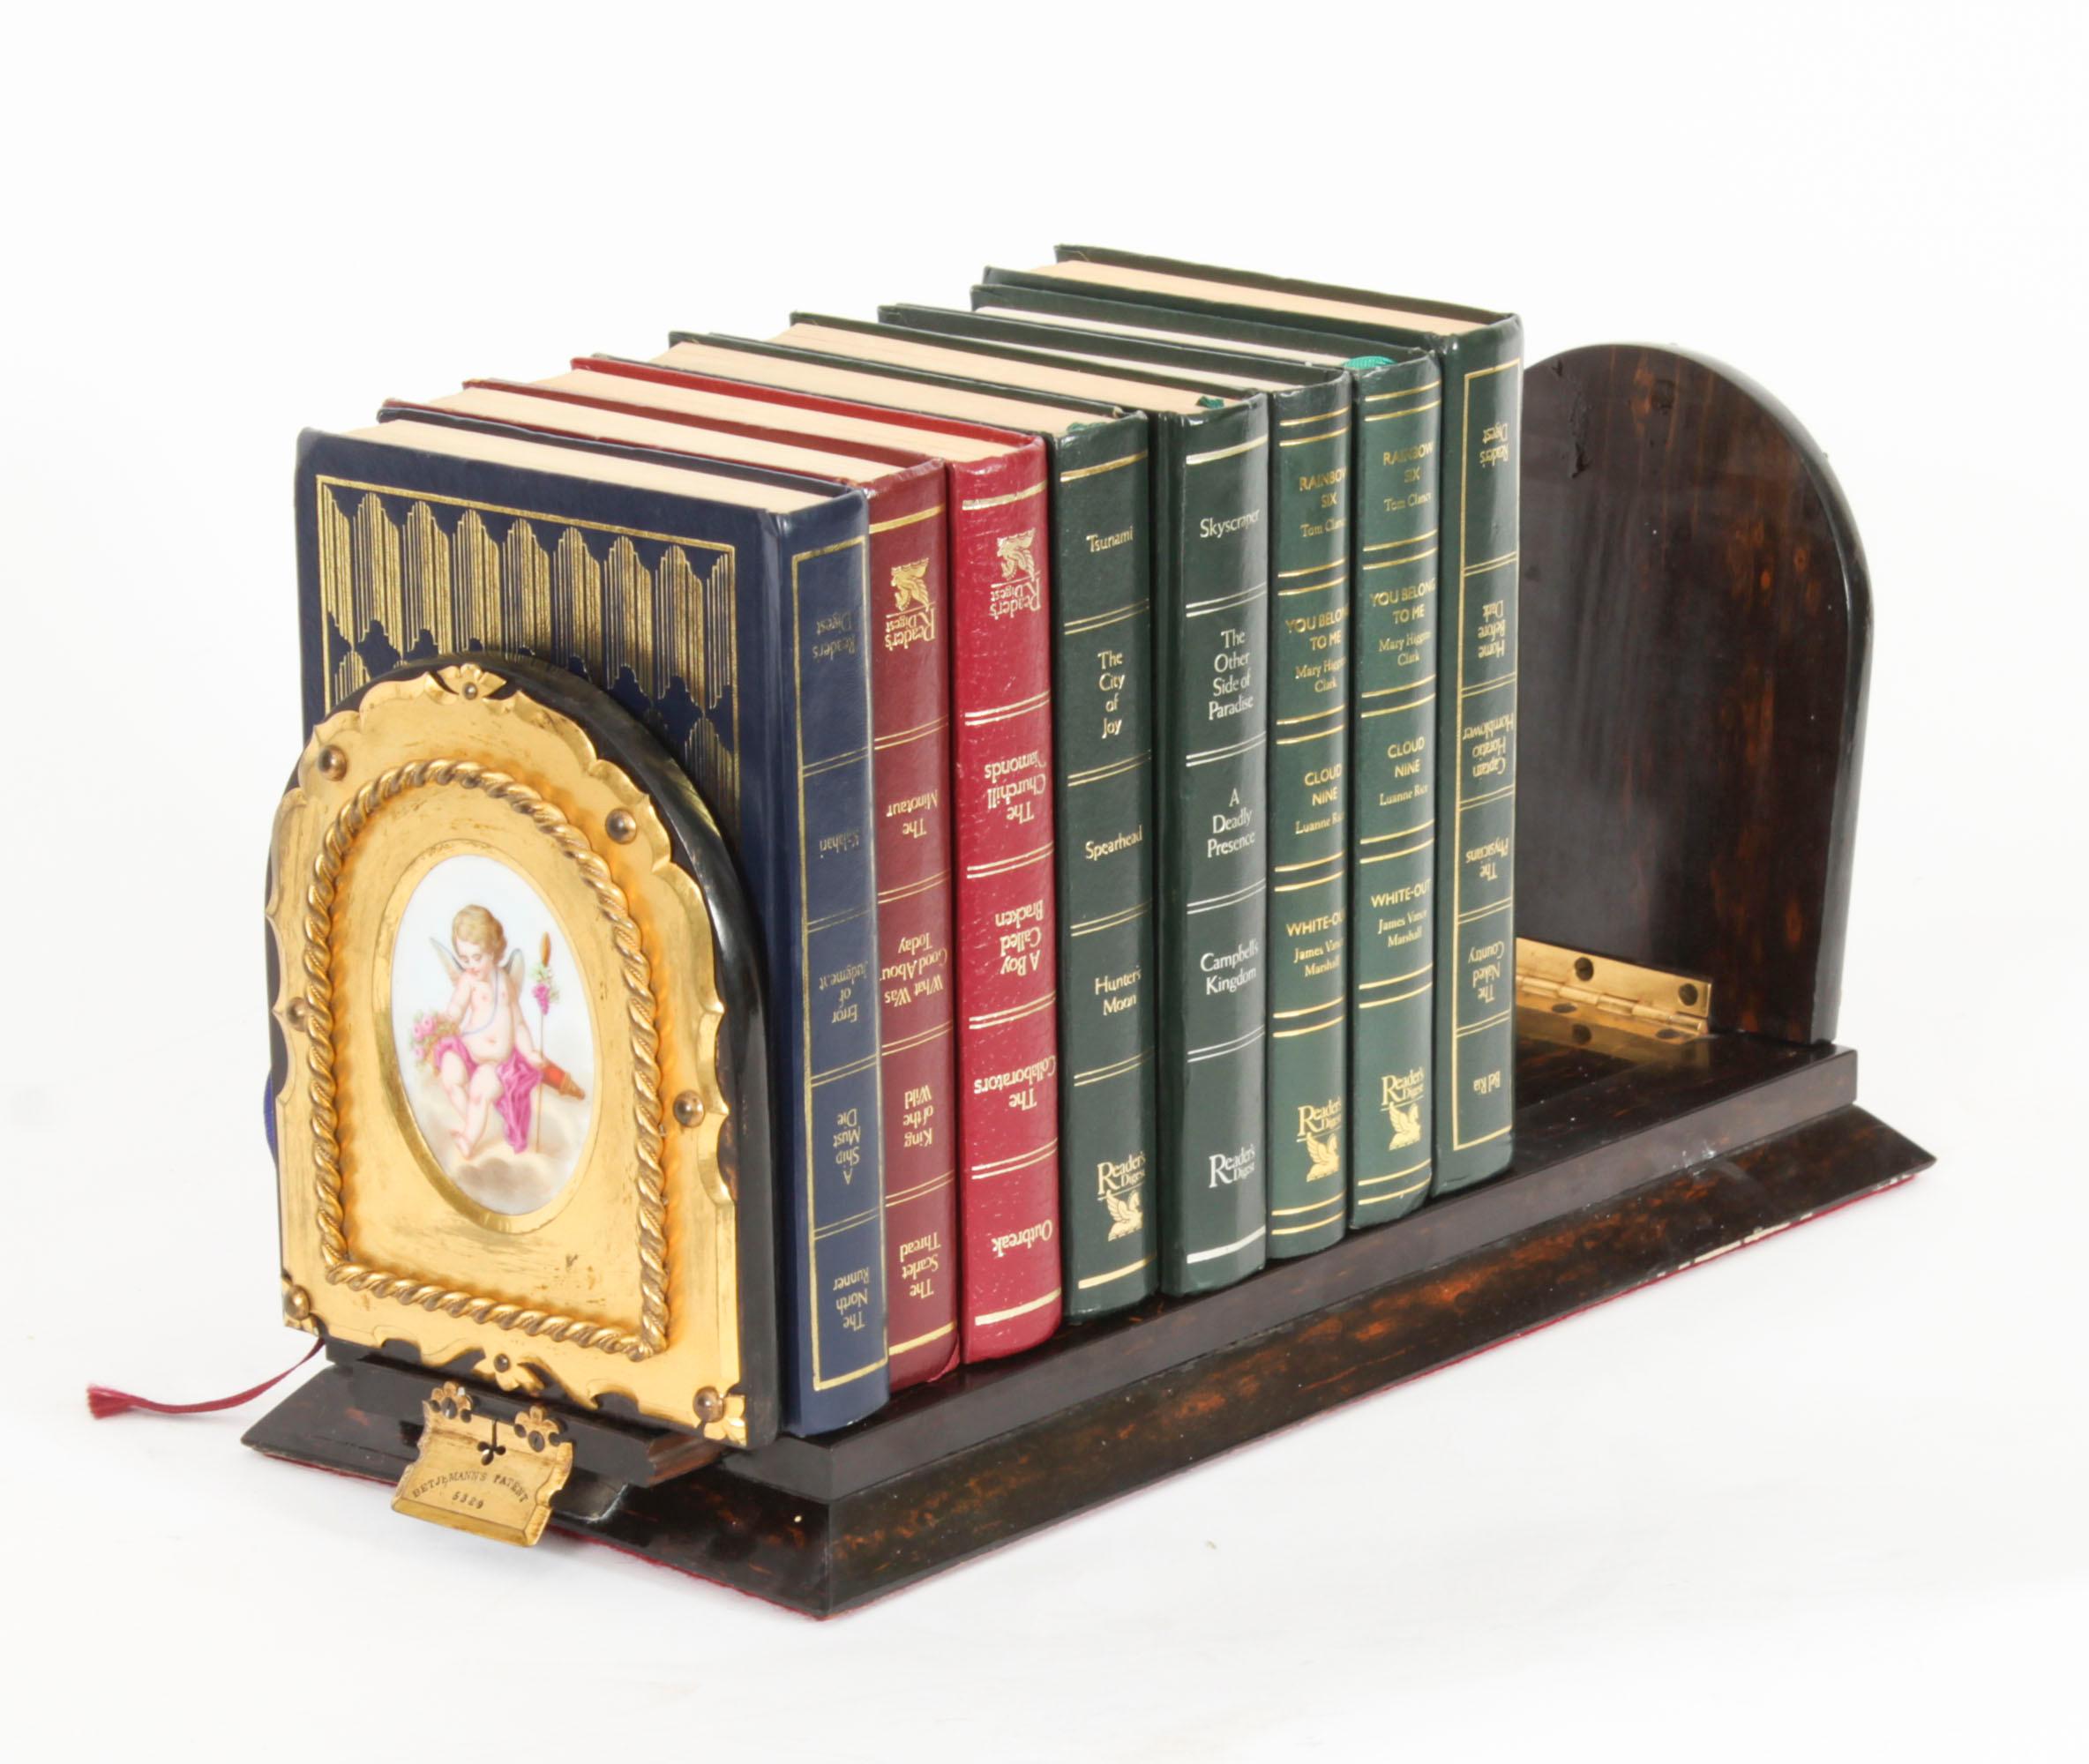 This is a high quality antique Victorian coromandel porcelain inset adjustable book slide, by Betjemann's, 19th century and circa 1870 in date.
 
It is made of stunnning coromandel and features a pair of oval gilt brass mounts enclosing porcelain